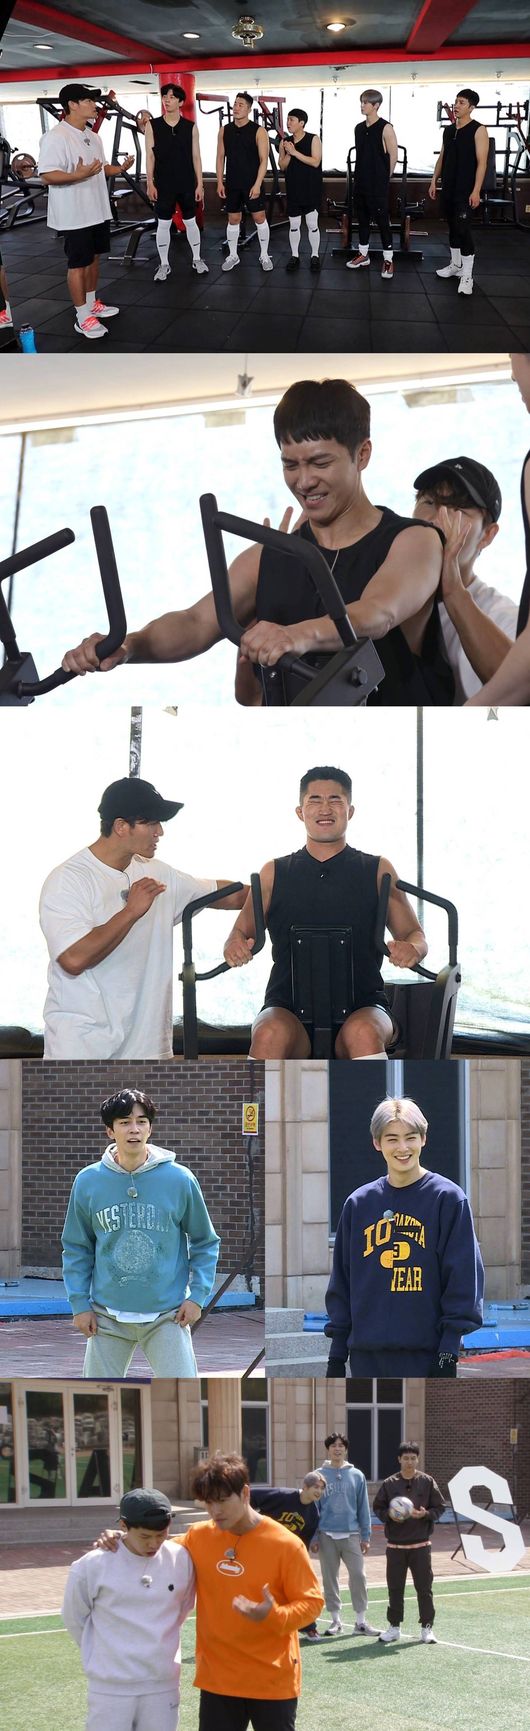 On SBS All The Butlers, which will be broadcast on April 25, a hardcore exercise course without Exit strategy prepared by Master Kim Jong-kook will be held.Kim Jong-kook, who gave delicious exercise tips to members from the last broadcast to bed, will guide members to eHealth, which is called a merchandising restaurant.Kim Jong-kook, who could not hide his excitement about the exercise, showed extreme exercises such as Squat 140kg carrying Kim Dong-Hyun.The members were surprised to see Kim Jong-kooks back muscles, which were stimulated and angry, and that he was surprised that he felt full of eggs in his crab-backed carapace.In addition, the members challenged the circit training of hell proposed by Kim Jong-kook.Kim Jong-kook, who has no break, is curious about who will survive safely on the Mata Taste course.On the other hand, Kim Jong-kooks vacation will be followed by Jokgu confrontation with members and unidentified UCLA Jokgu team.The confident members were embarrassed by the unexpected performance of the opponent team.In the end, Kim Jong-kook, who was burned by the desire to win, was dragged out of the roar and laughed.In particular, Yang had a time with Kim Jong-kook and received intensive education.Who will be the winner in the All The Butlers battle with the opponent team, and the hells eHealth vacation with the hicks will be unveiled at SBS All The Butlers broadcasted at 6:25 pm on the 25th.SBS